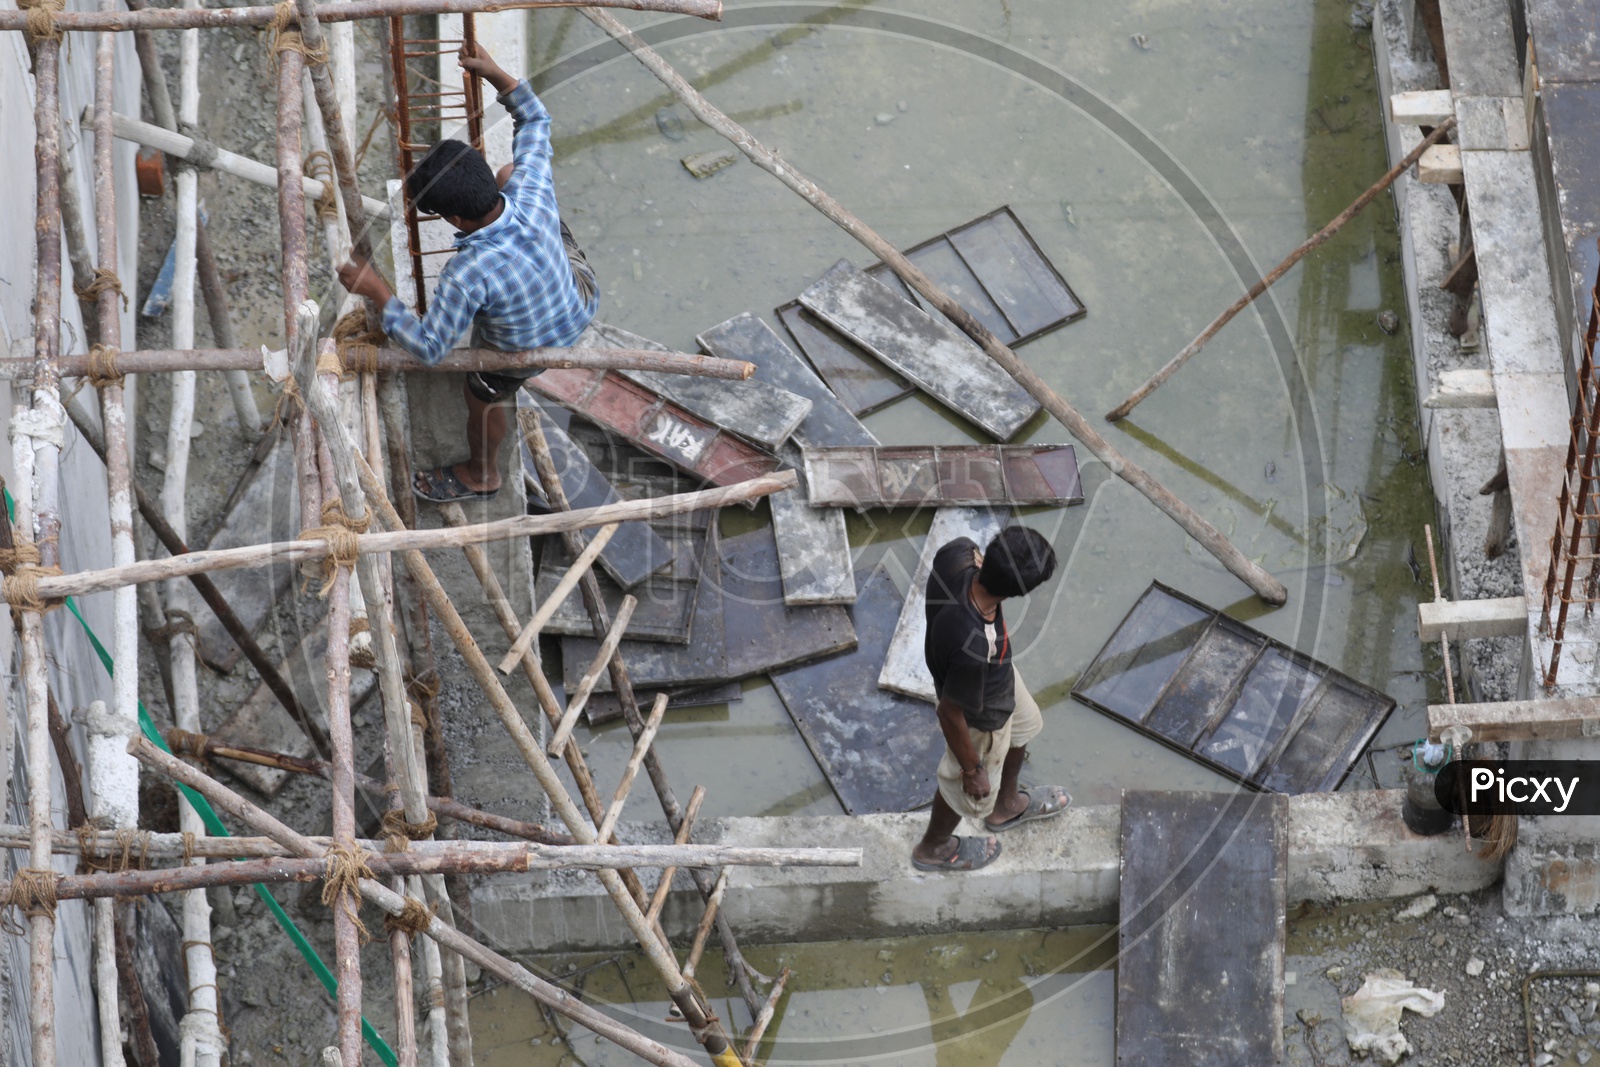 Indian men during work at a construction site